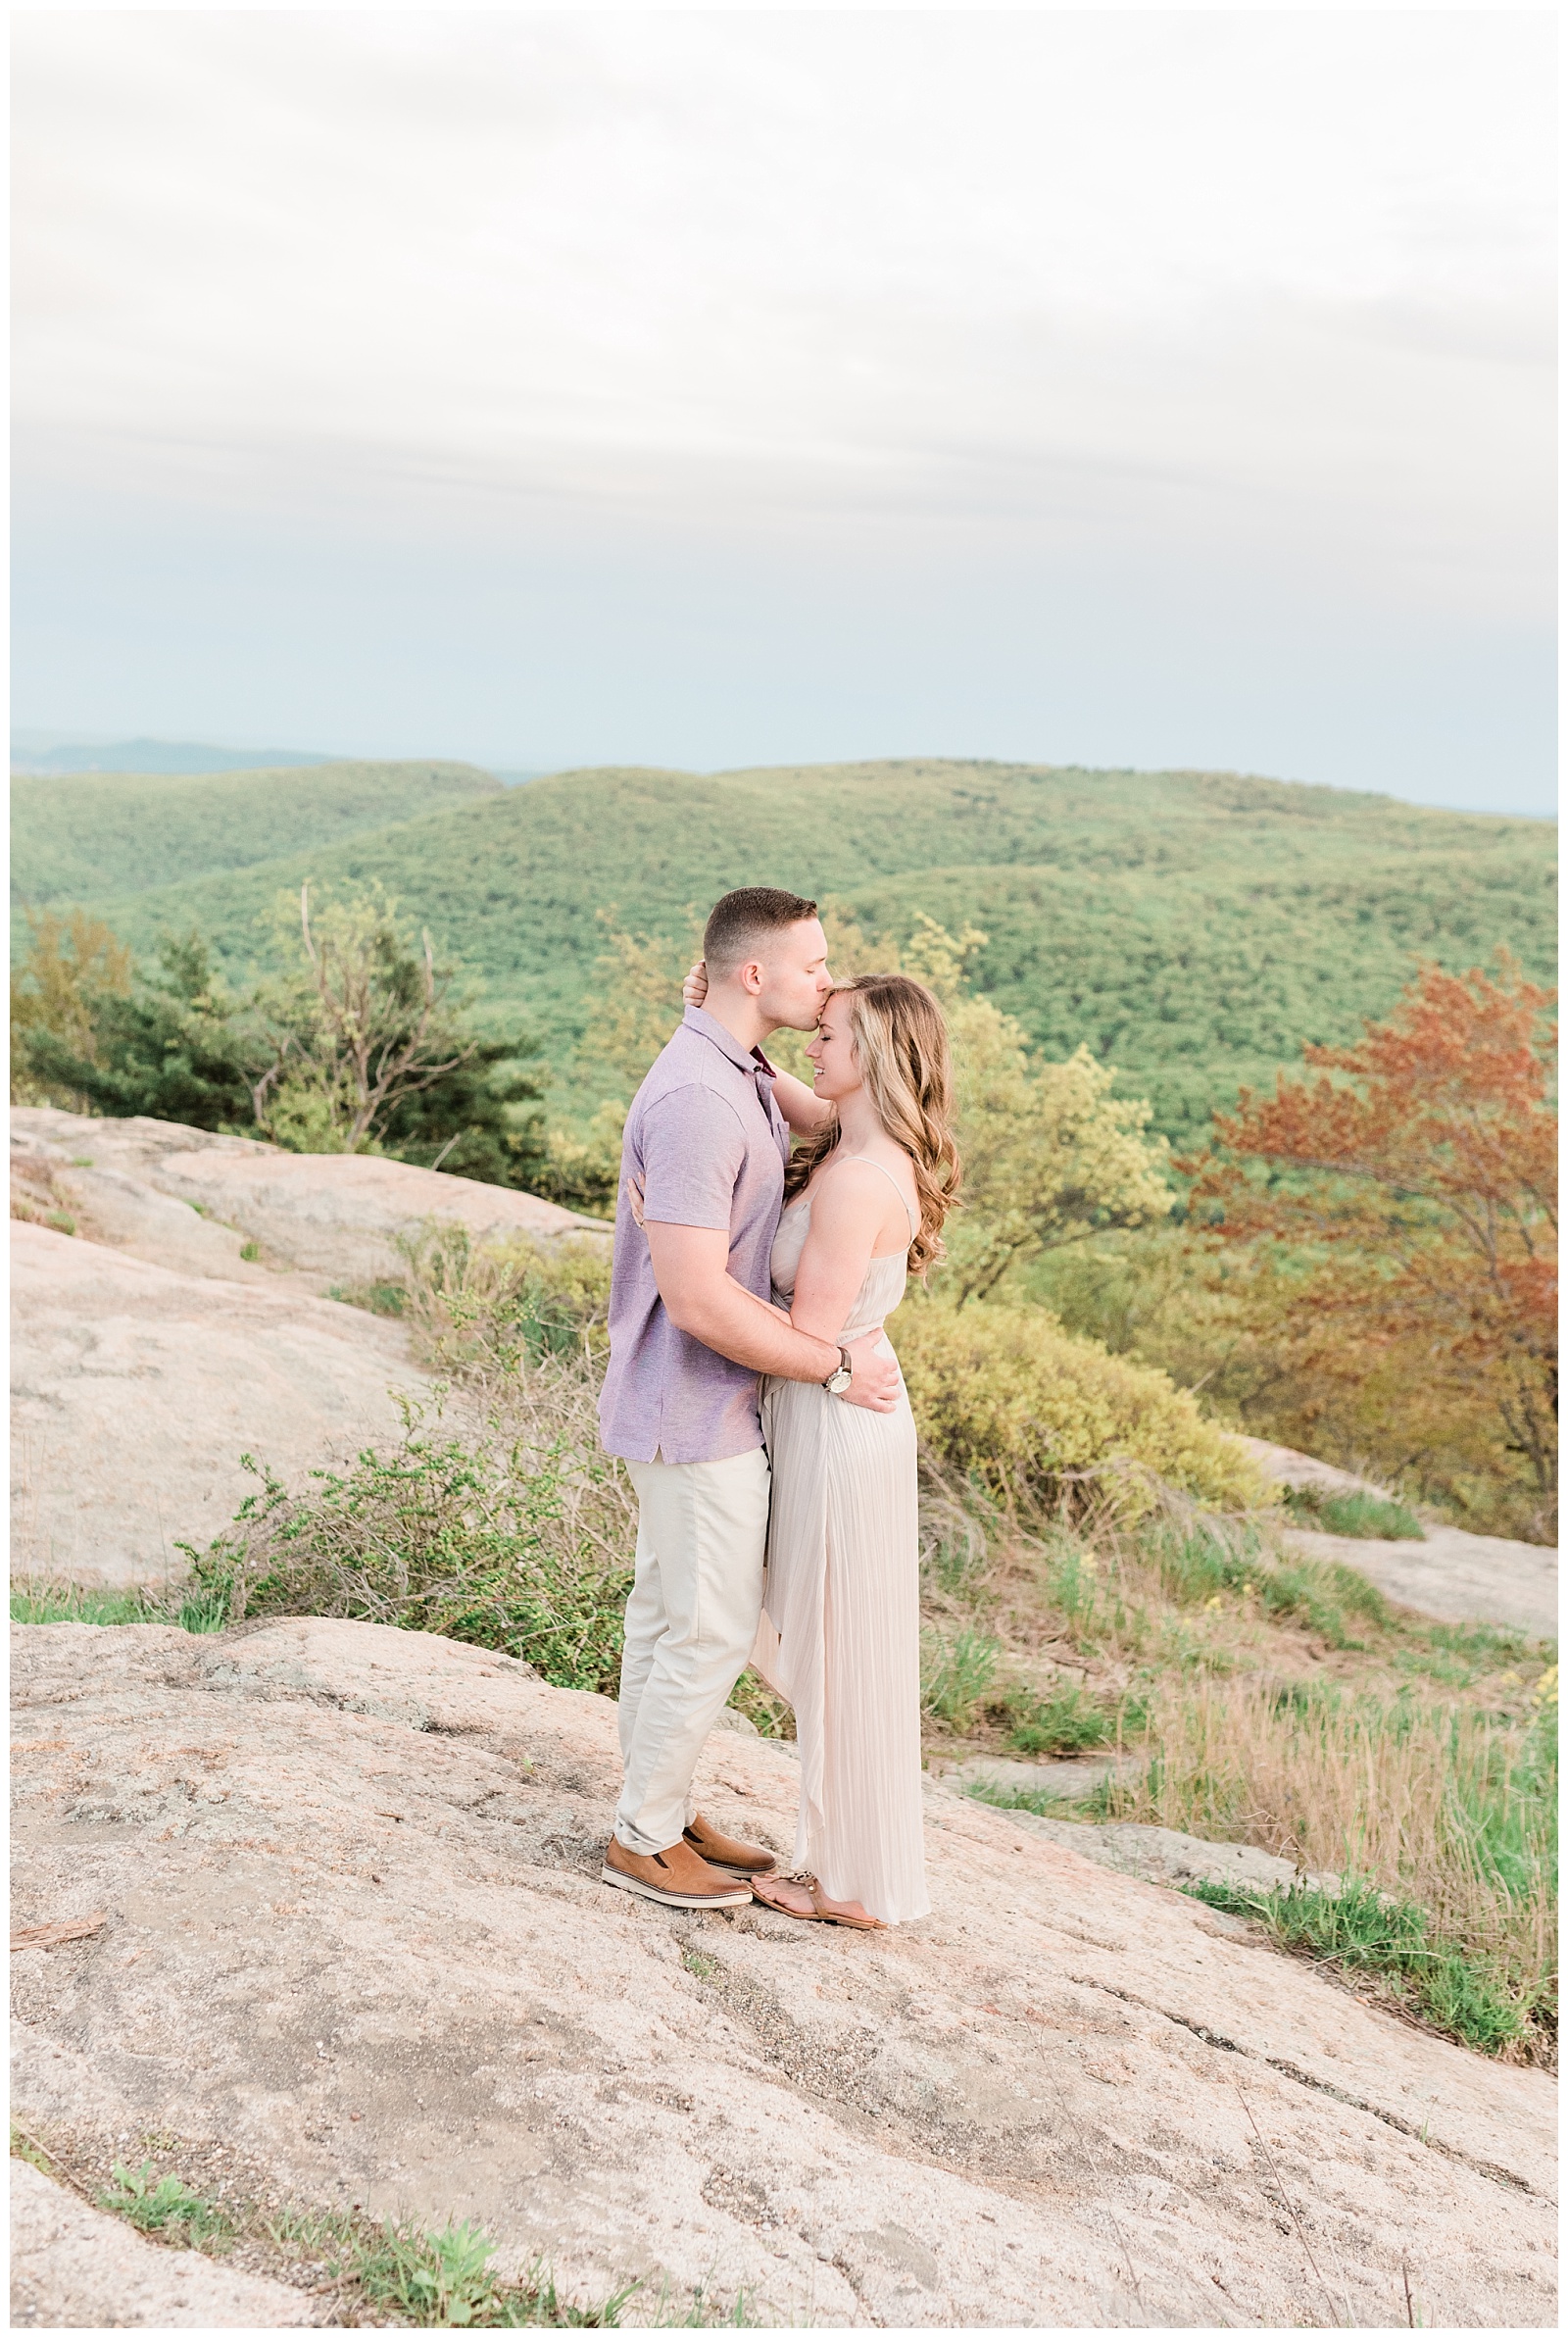 A man kisses a woman's forehead on top of a mountain during golden hour.